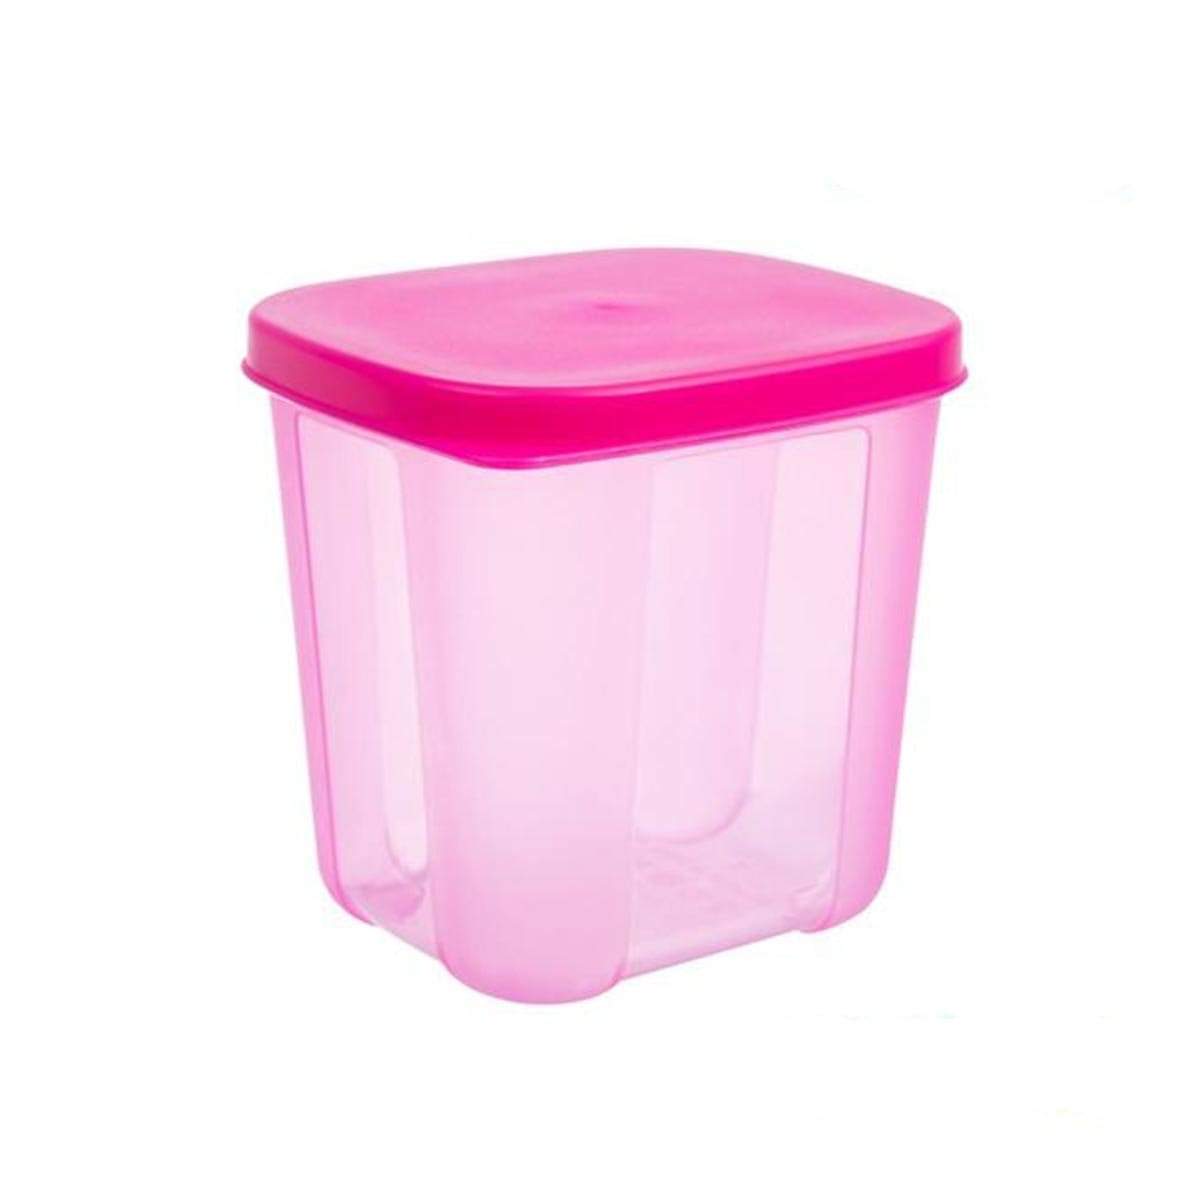 0123 Food Container 0.67L